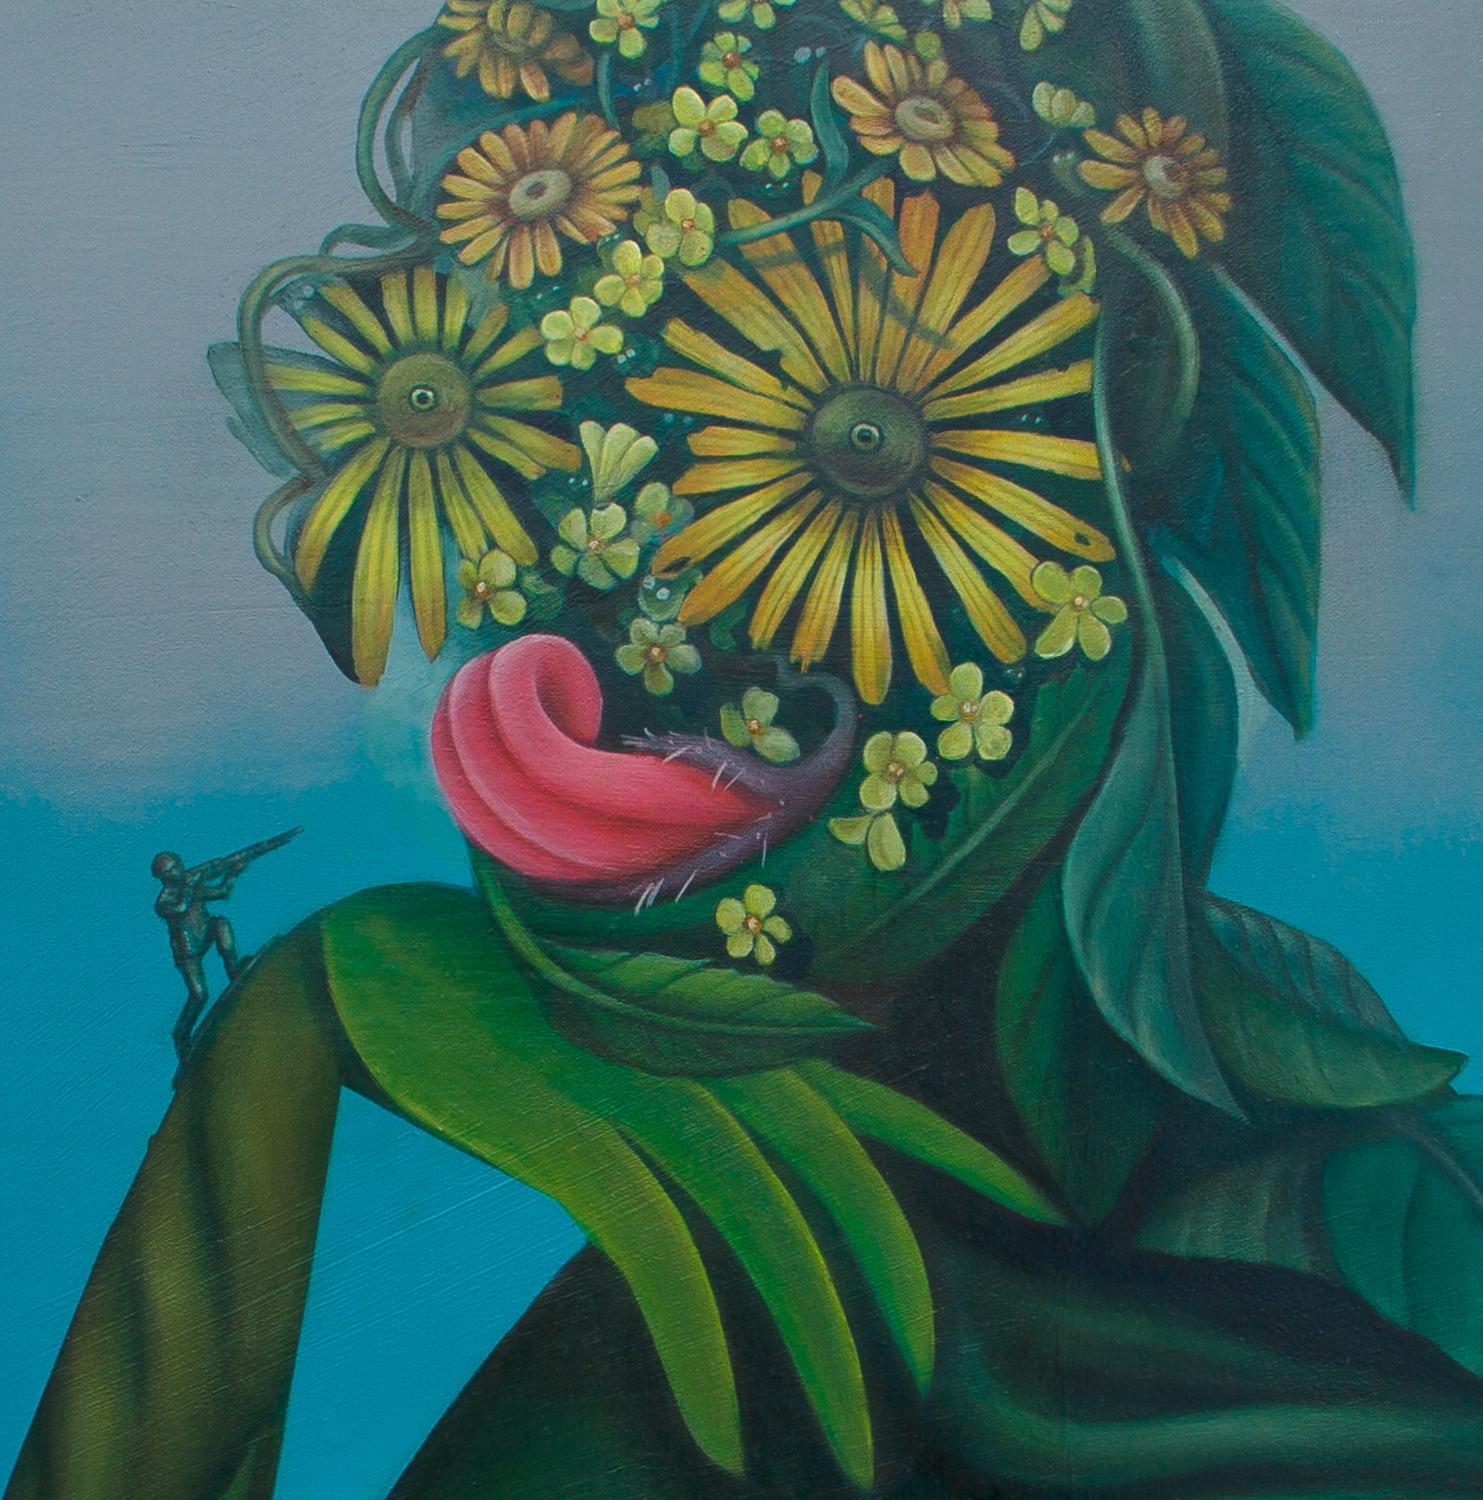 Contemporary Pop Surrealistic Anthropomorphic Figure Toy Soldier Against Nature - Painting by Natasha Lelenco